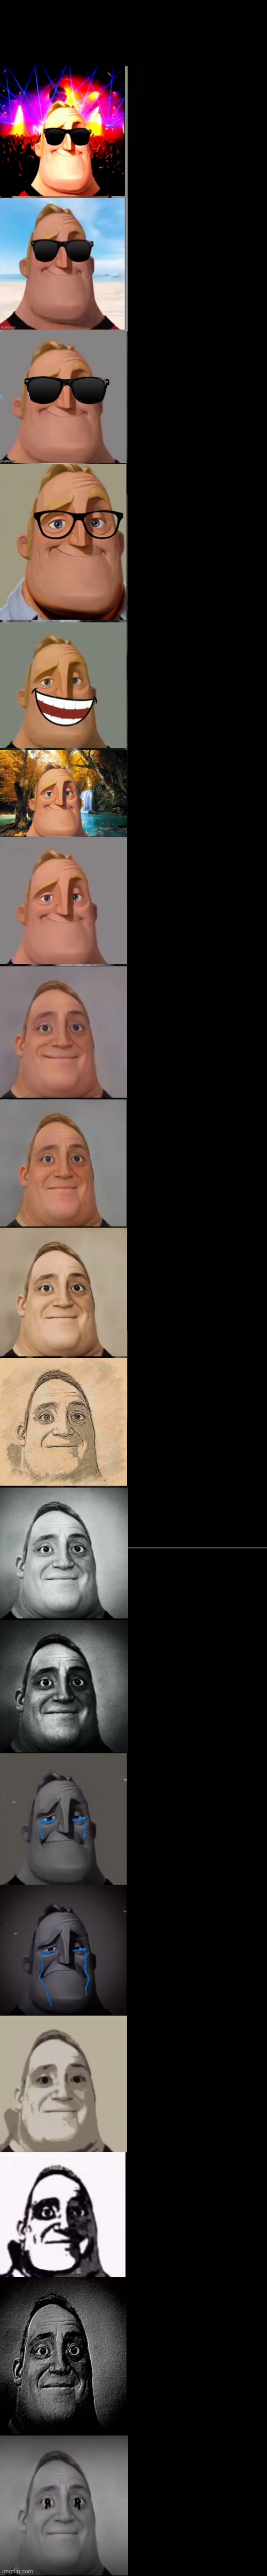 Mr. Incredible becoming uncanny Giga Extended Part 2 | image tagged in mr incredible becoming uncanny,memes,blank transparent square | made w/ Imgflip meme maker